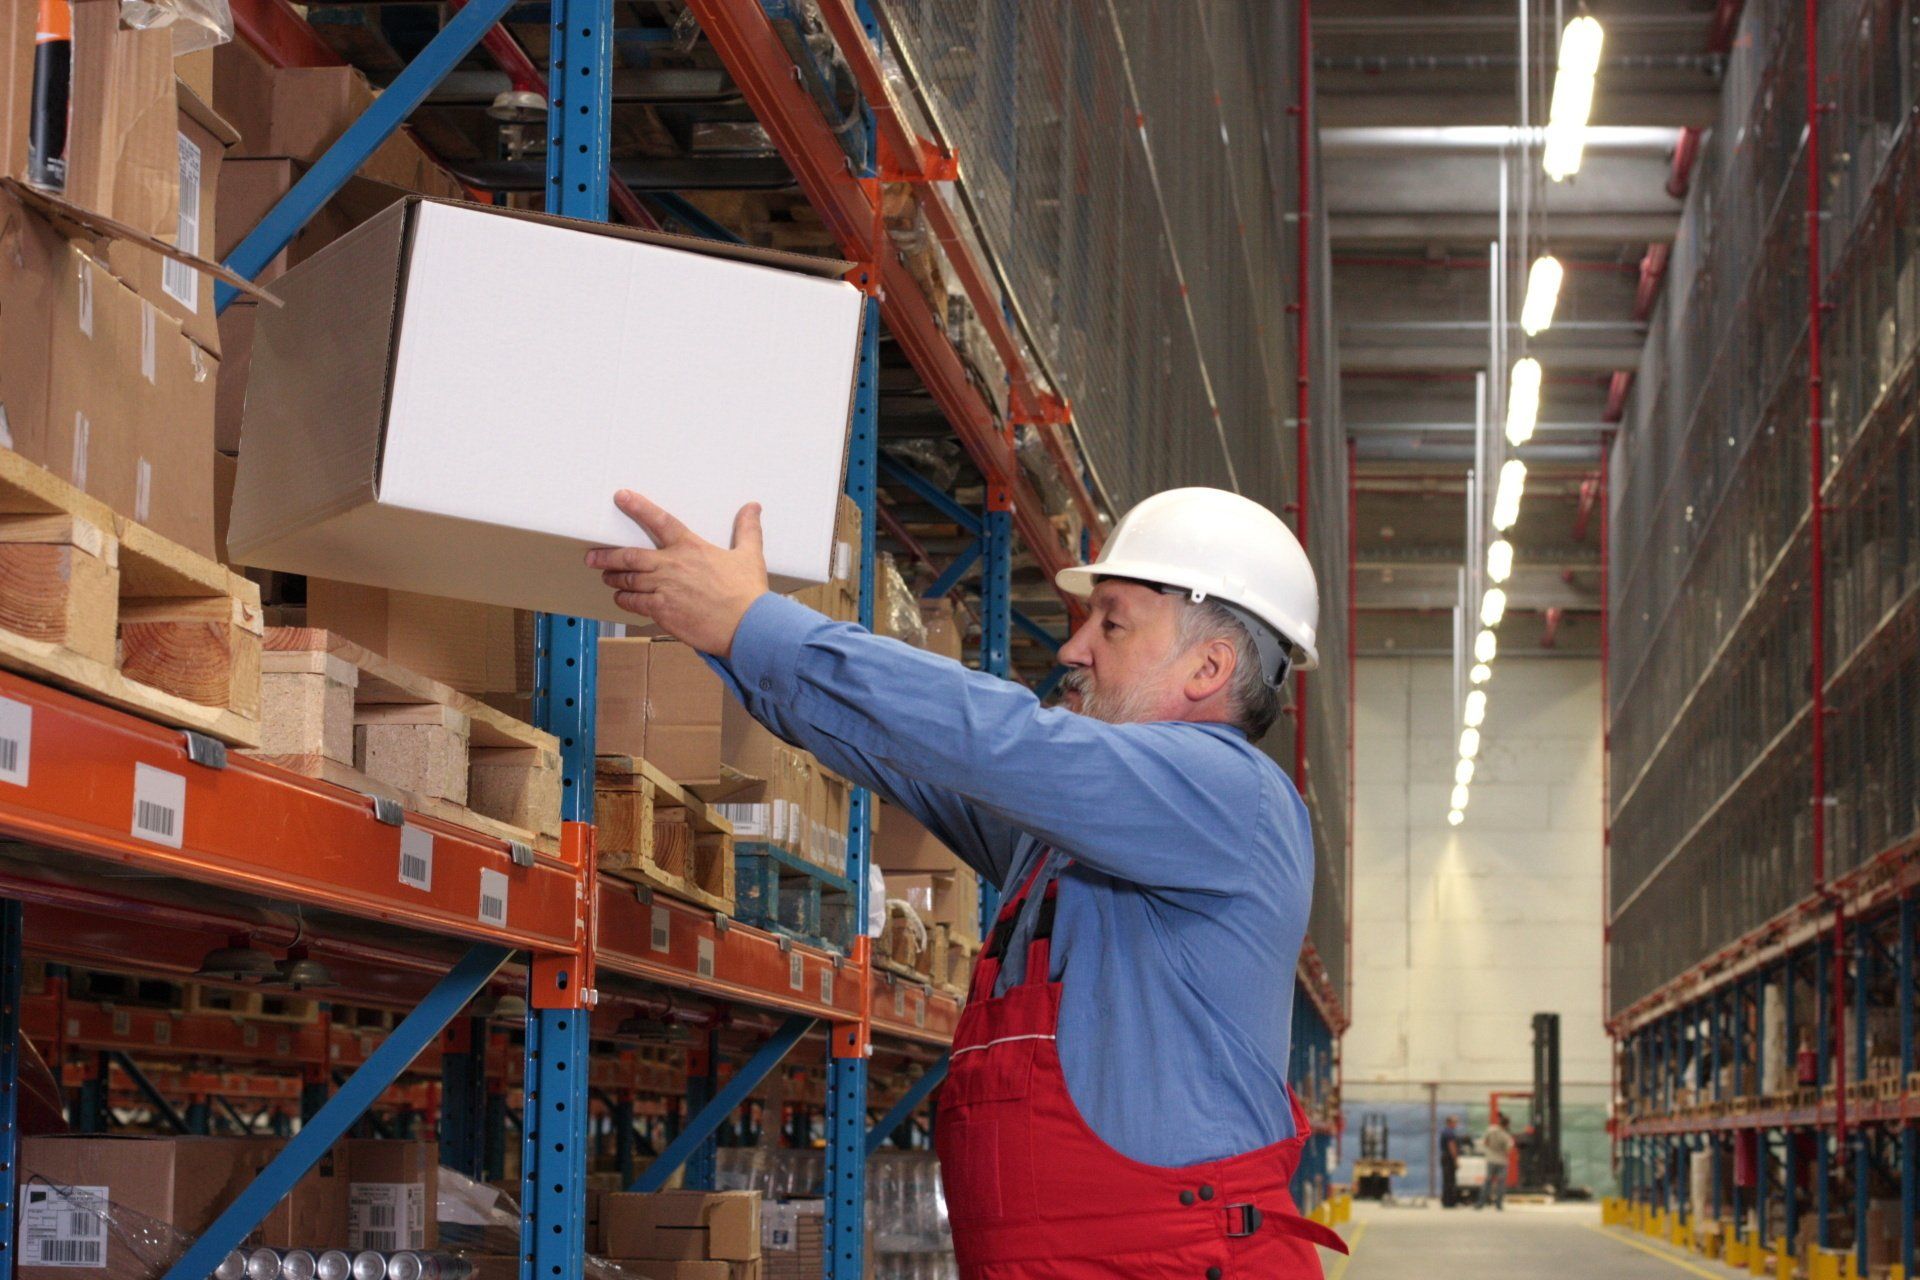 Master manual handling for a safer workplace. Enroll in manual handling courses, including online options, from Safety Course Ireland. Learn proper lifting techniques, risk assessment, and legal compliance. Enhance skills, prevent injuries.